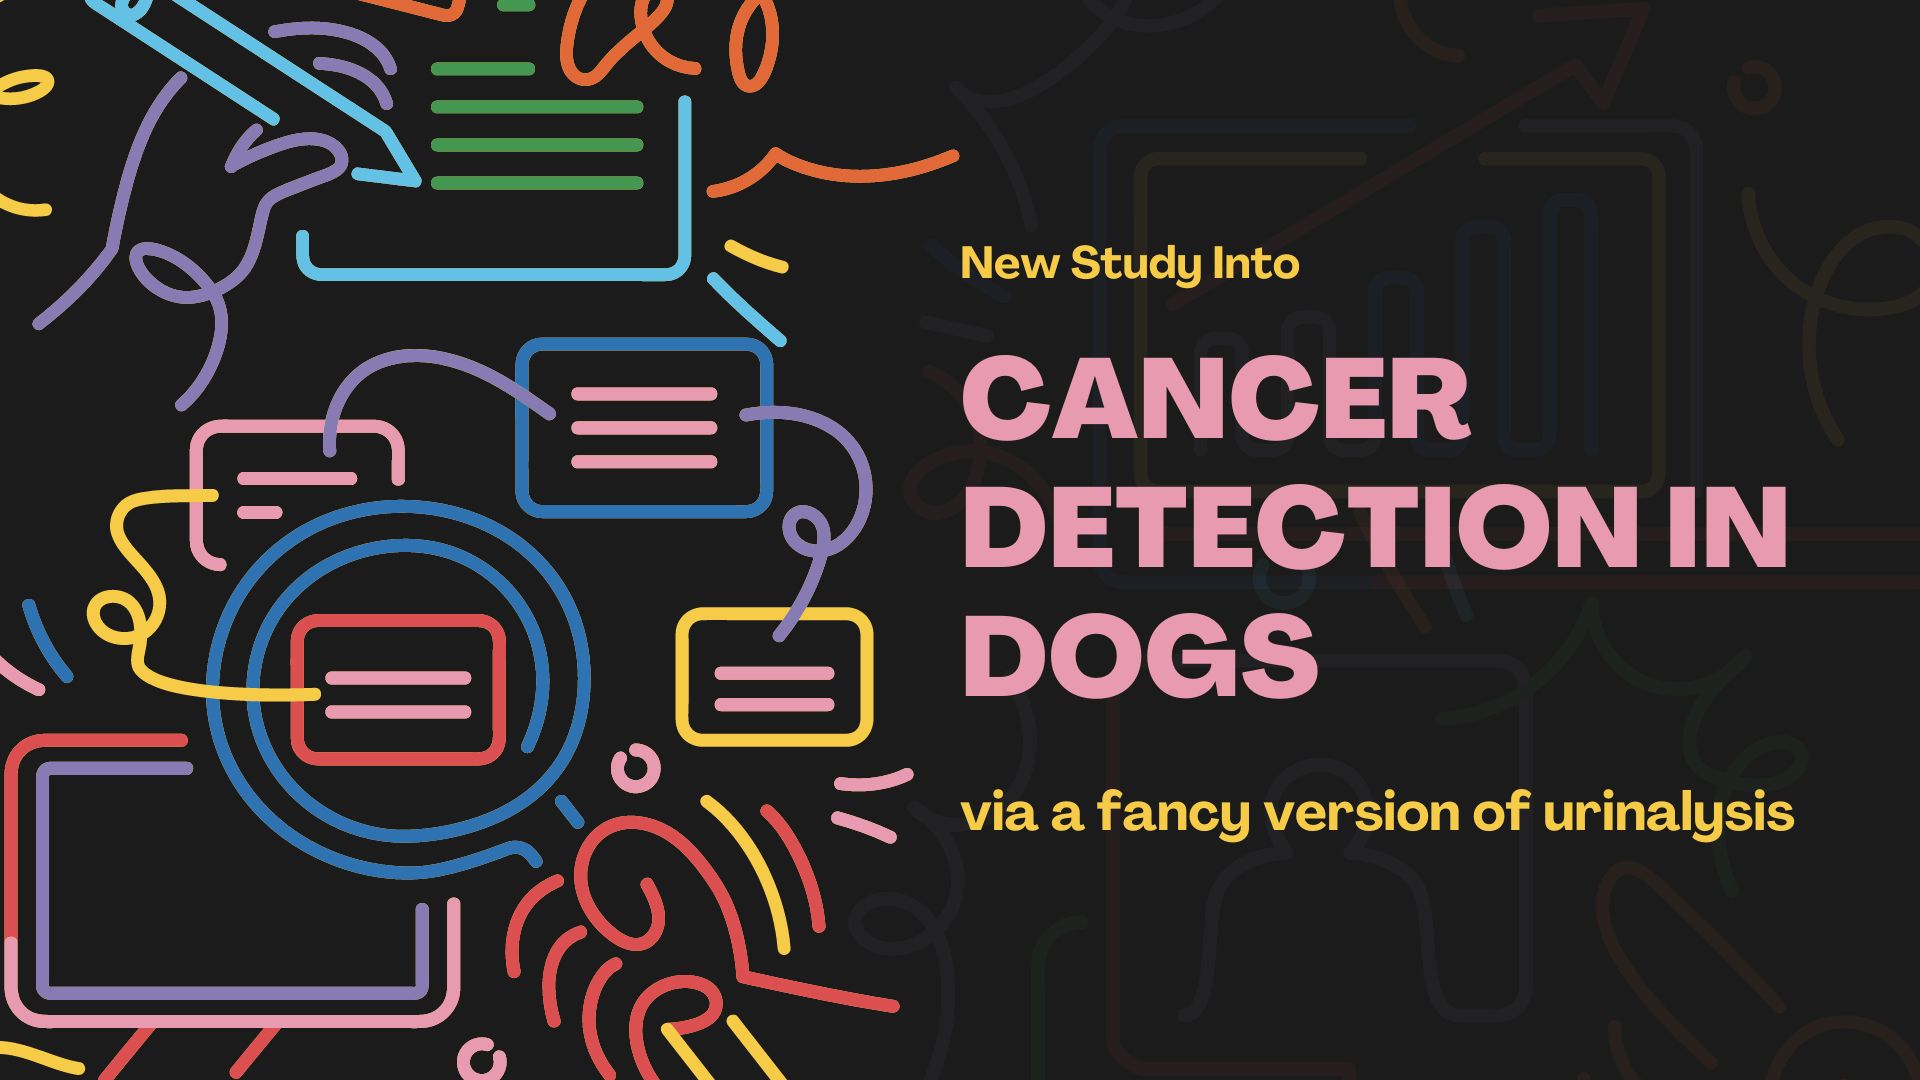 detecting dog cancers main graphic ... says new study into cancer detection in dogs, via a fancy version of urinalysis